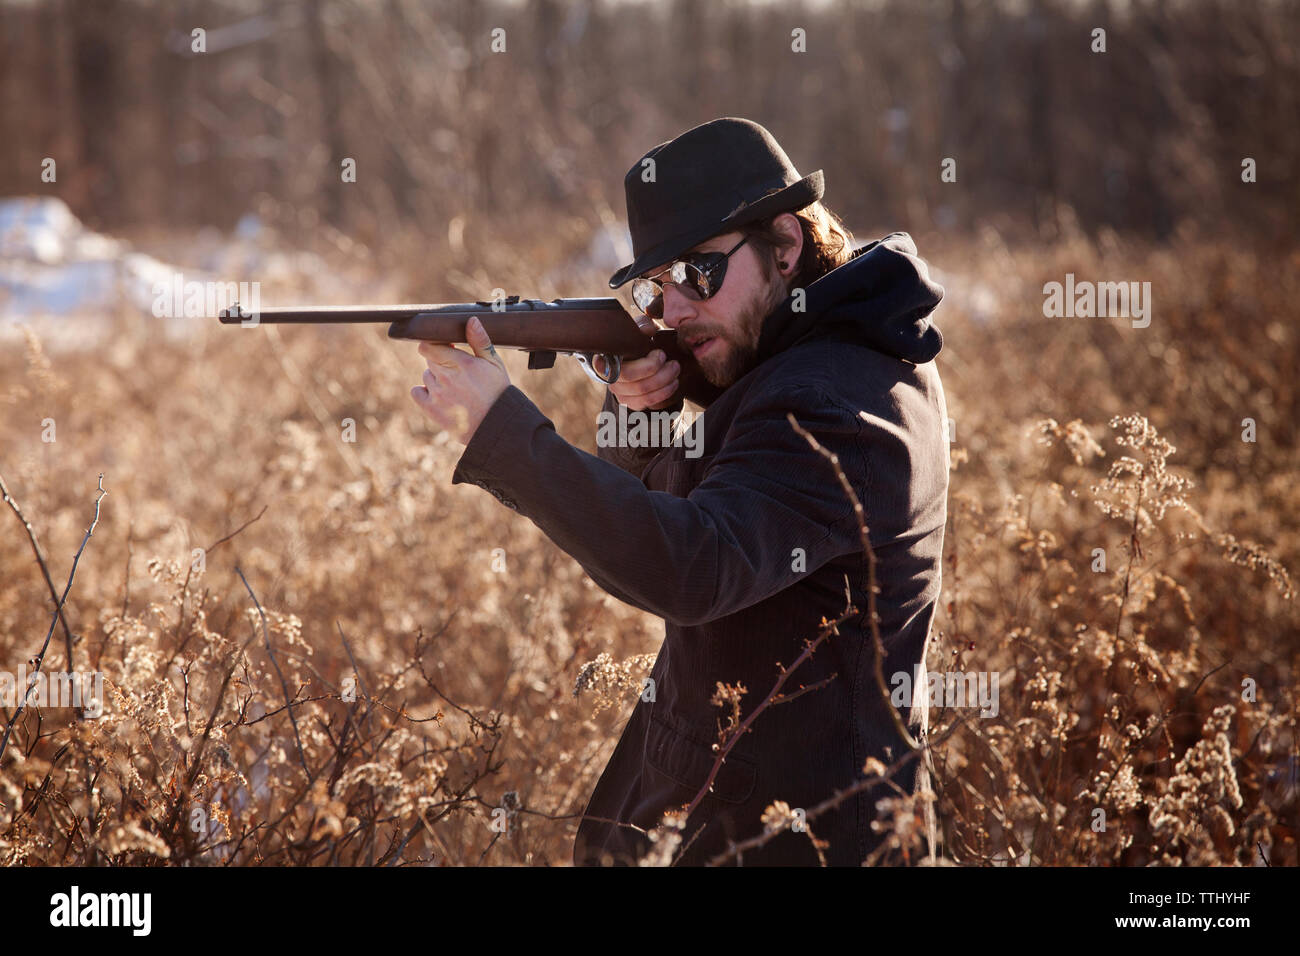 Man aiming with rifle while standing by plants Stock Photo